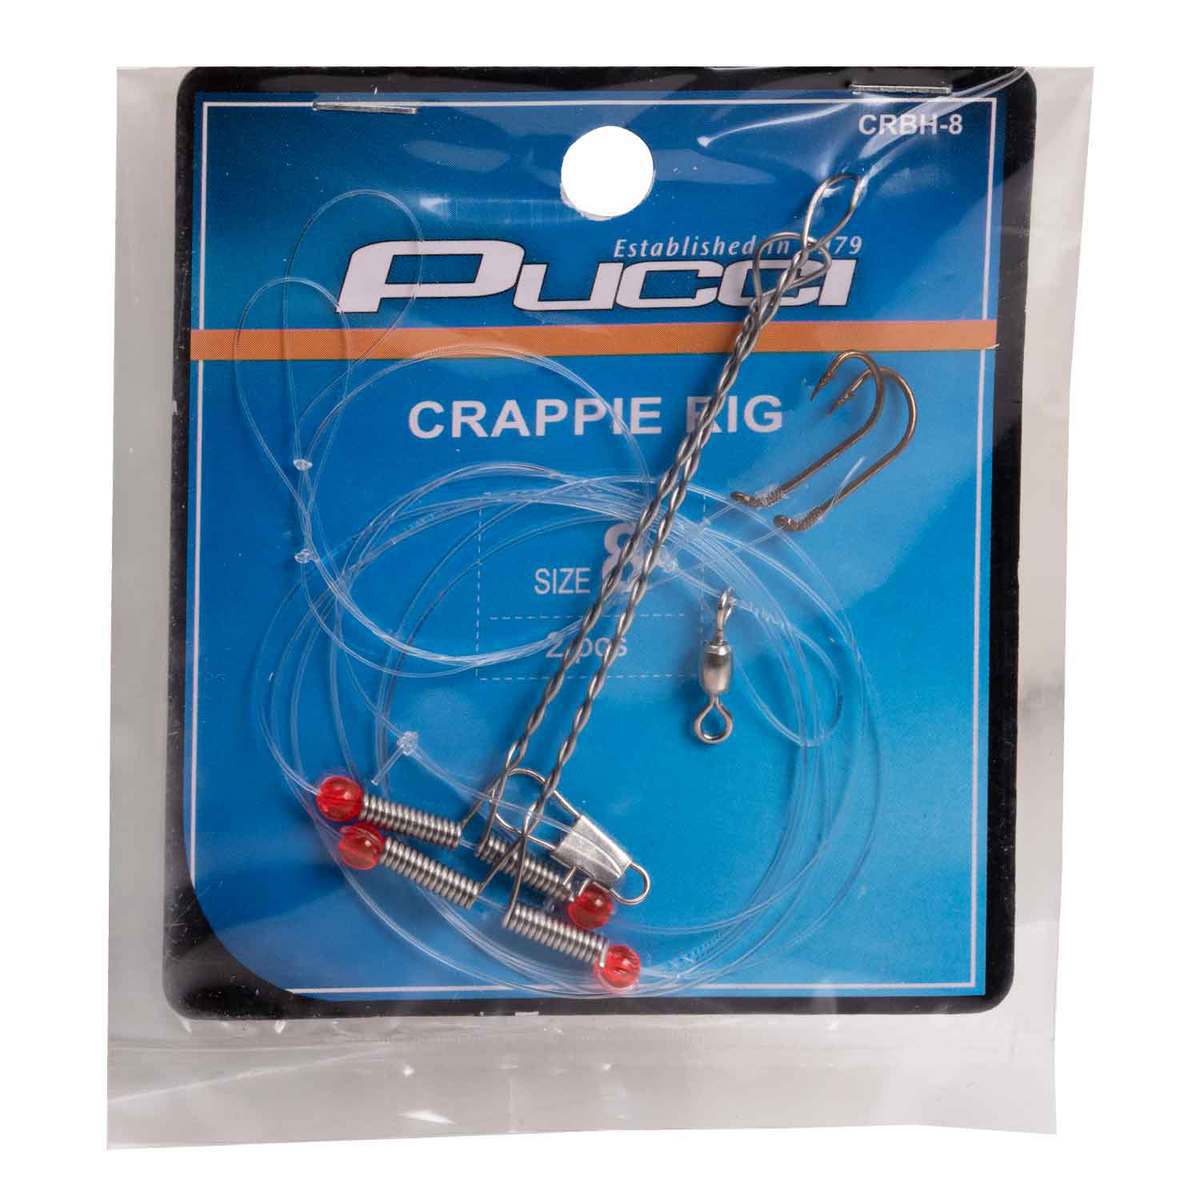 P-Line CRBH-6 Crappie Rig Bh Hook Crbh-6 Pk 1, Bait Rigs -  Canada